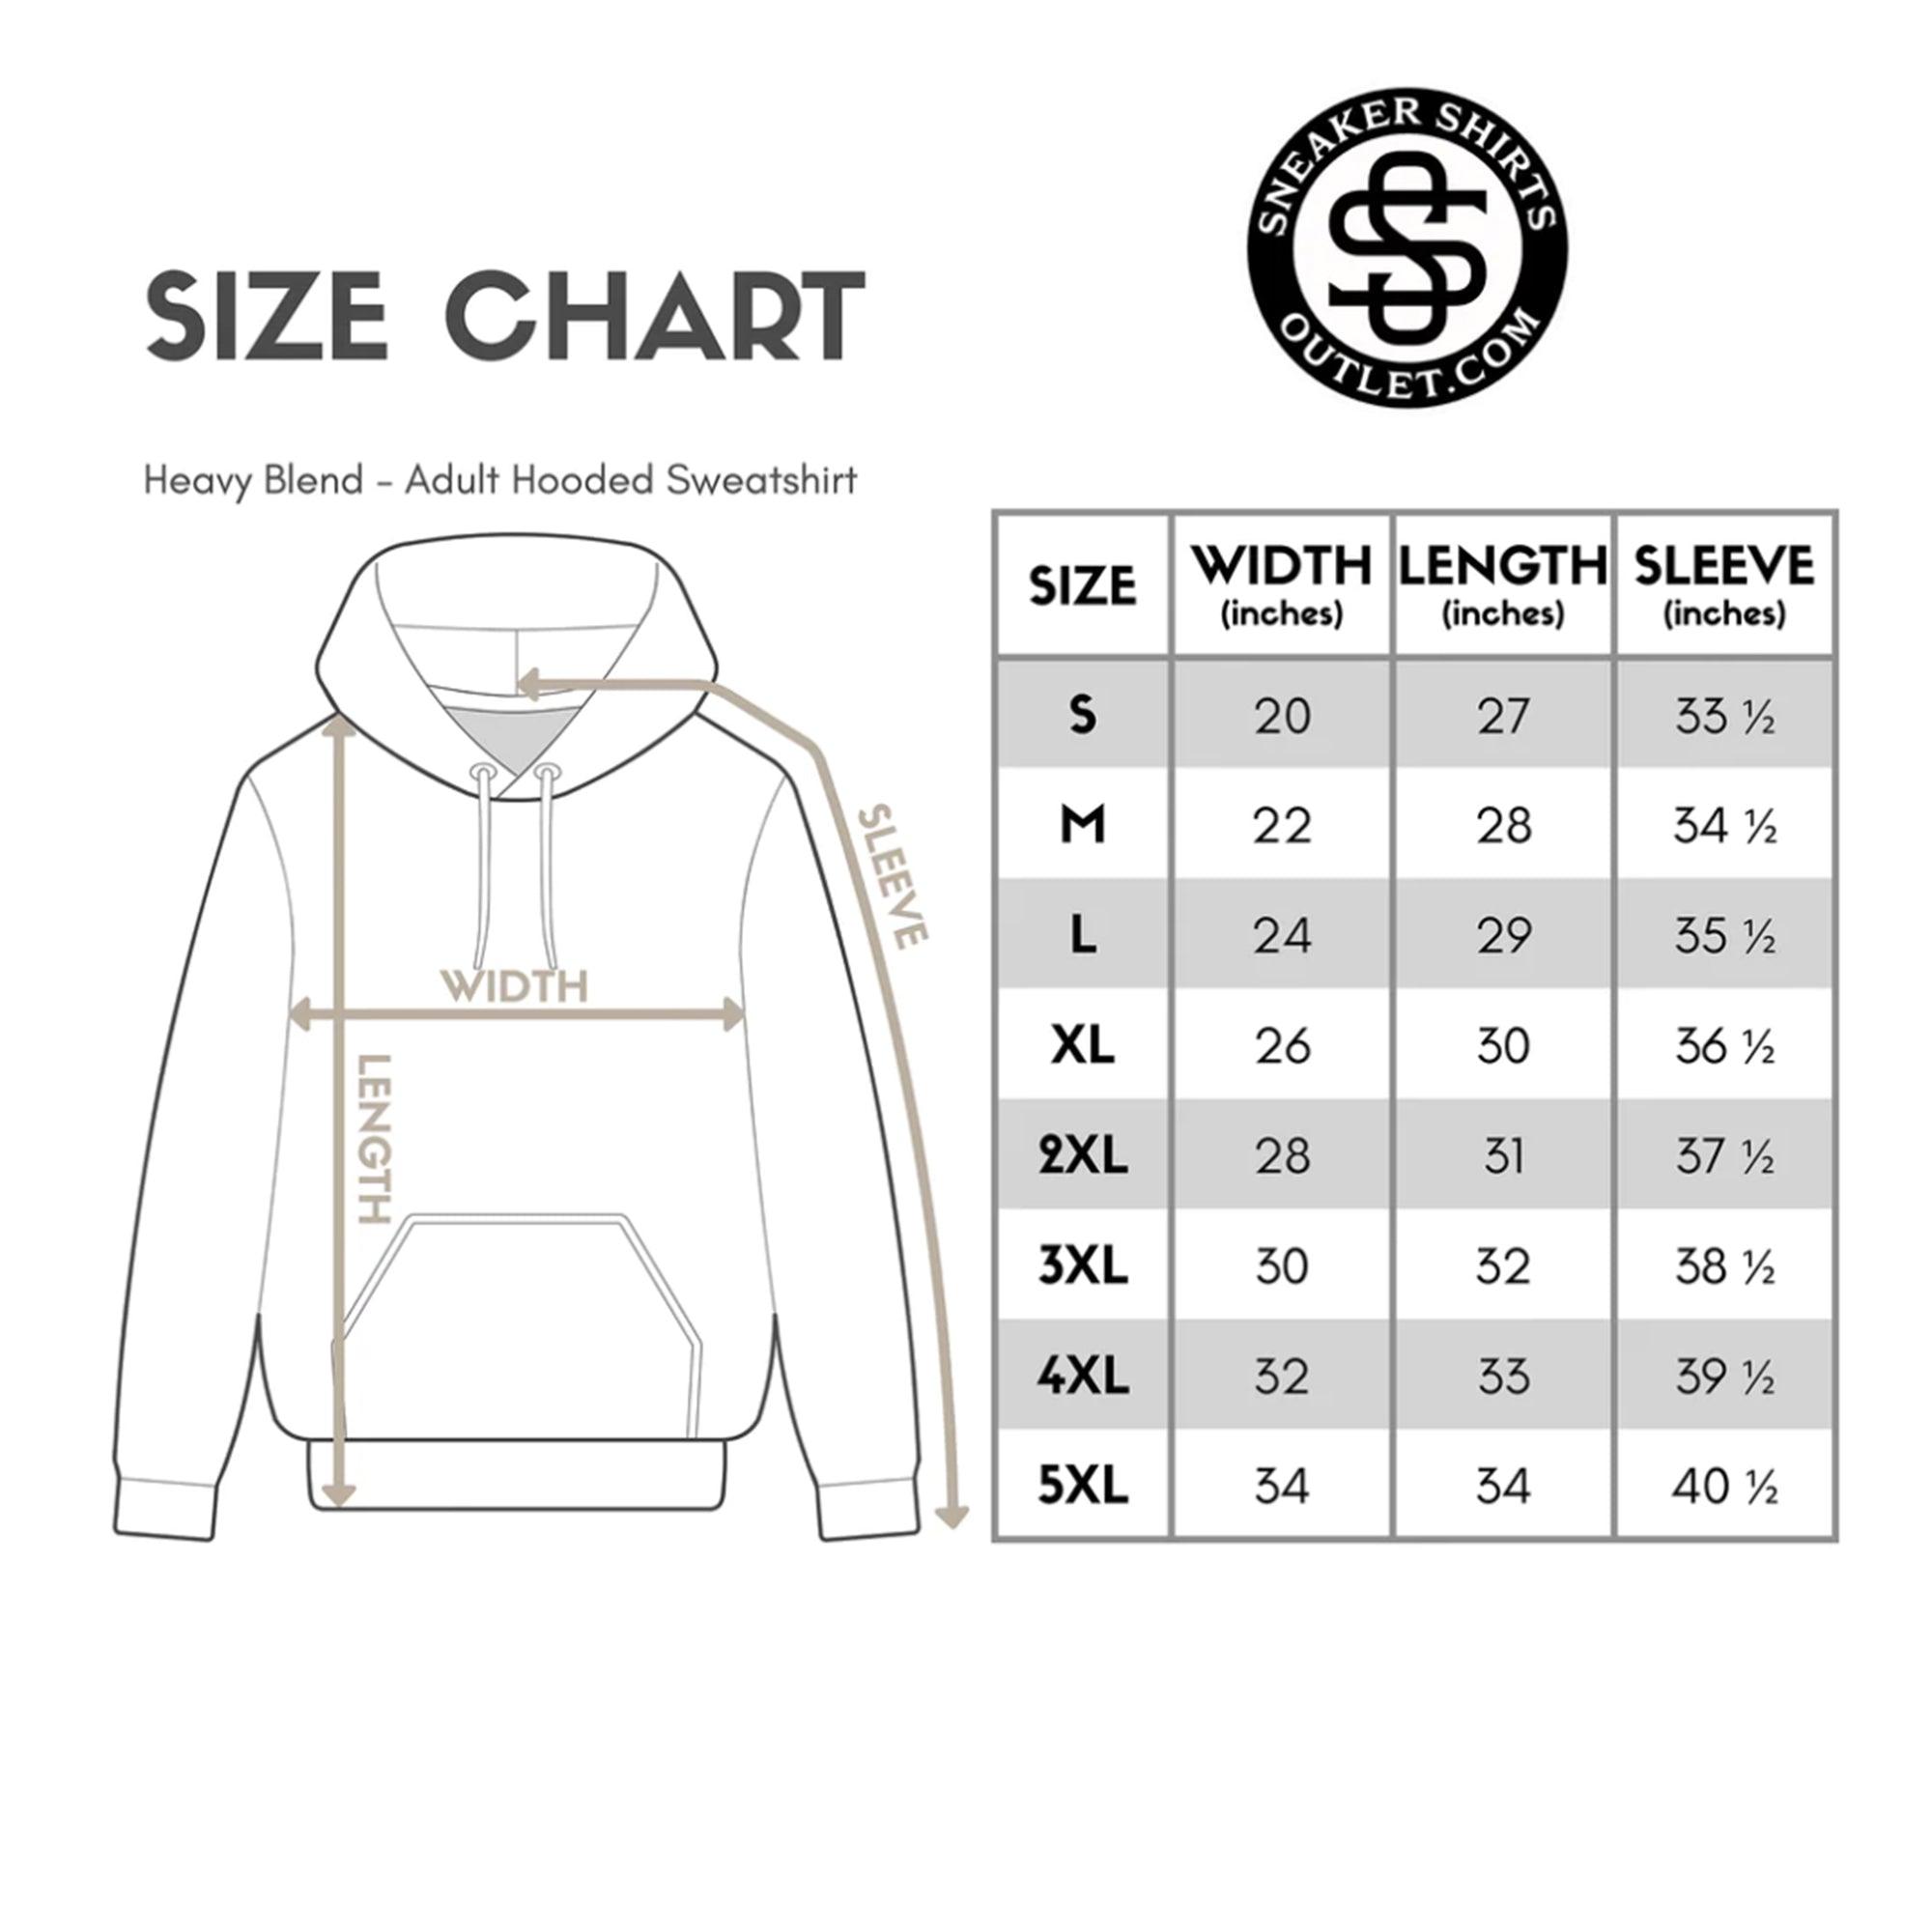 size chart for Drippin Lips Hoodie Yeezy Boost 700 Bright Blue photo